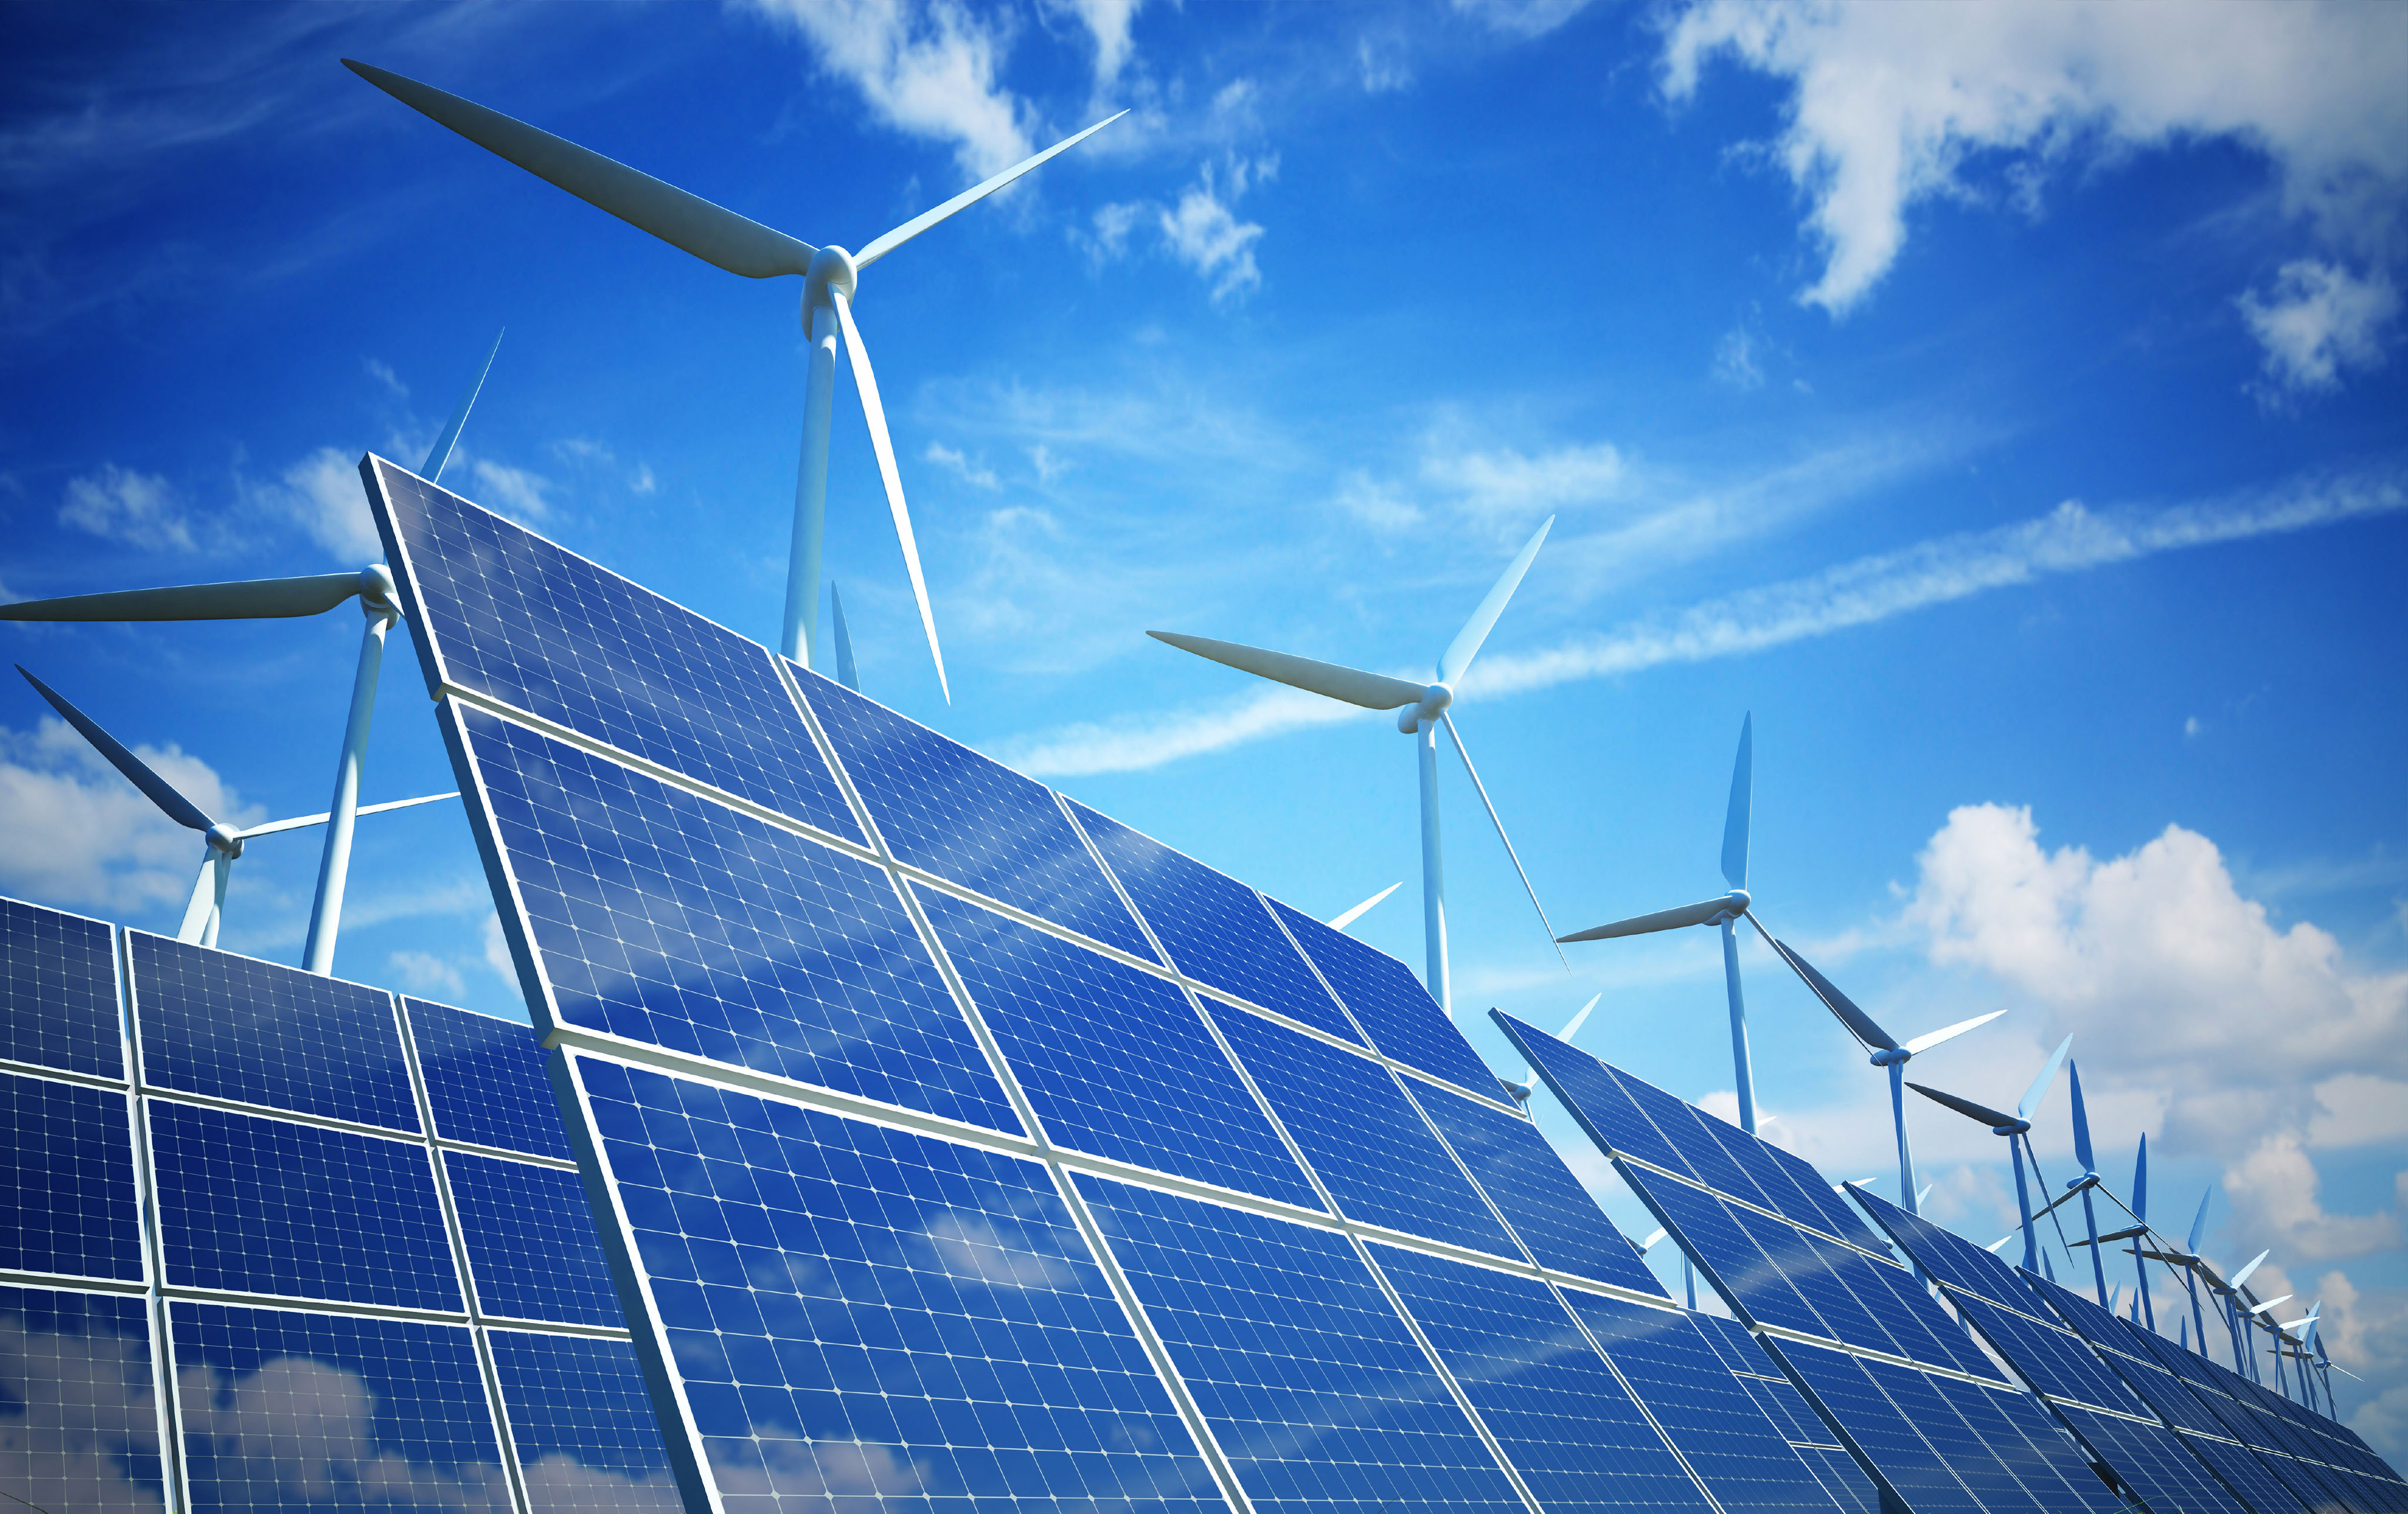 Wind turbines and solar panels produce Green Energy